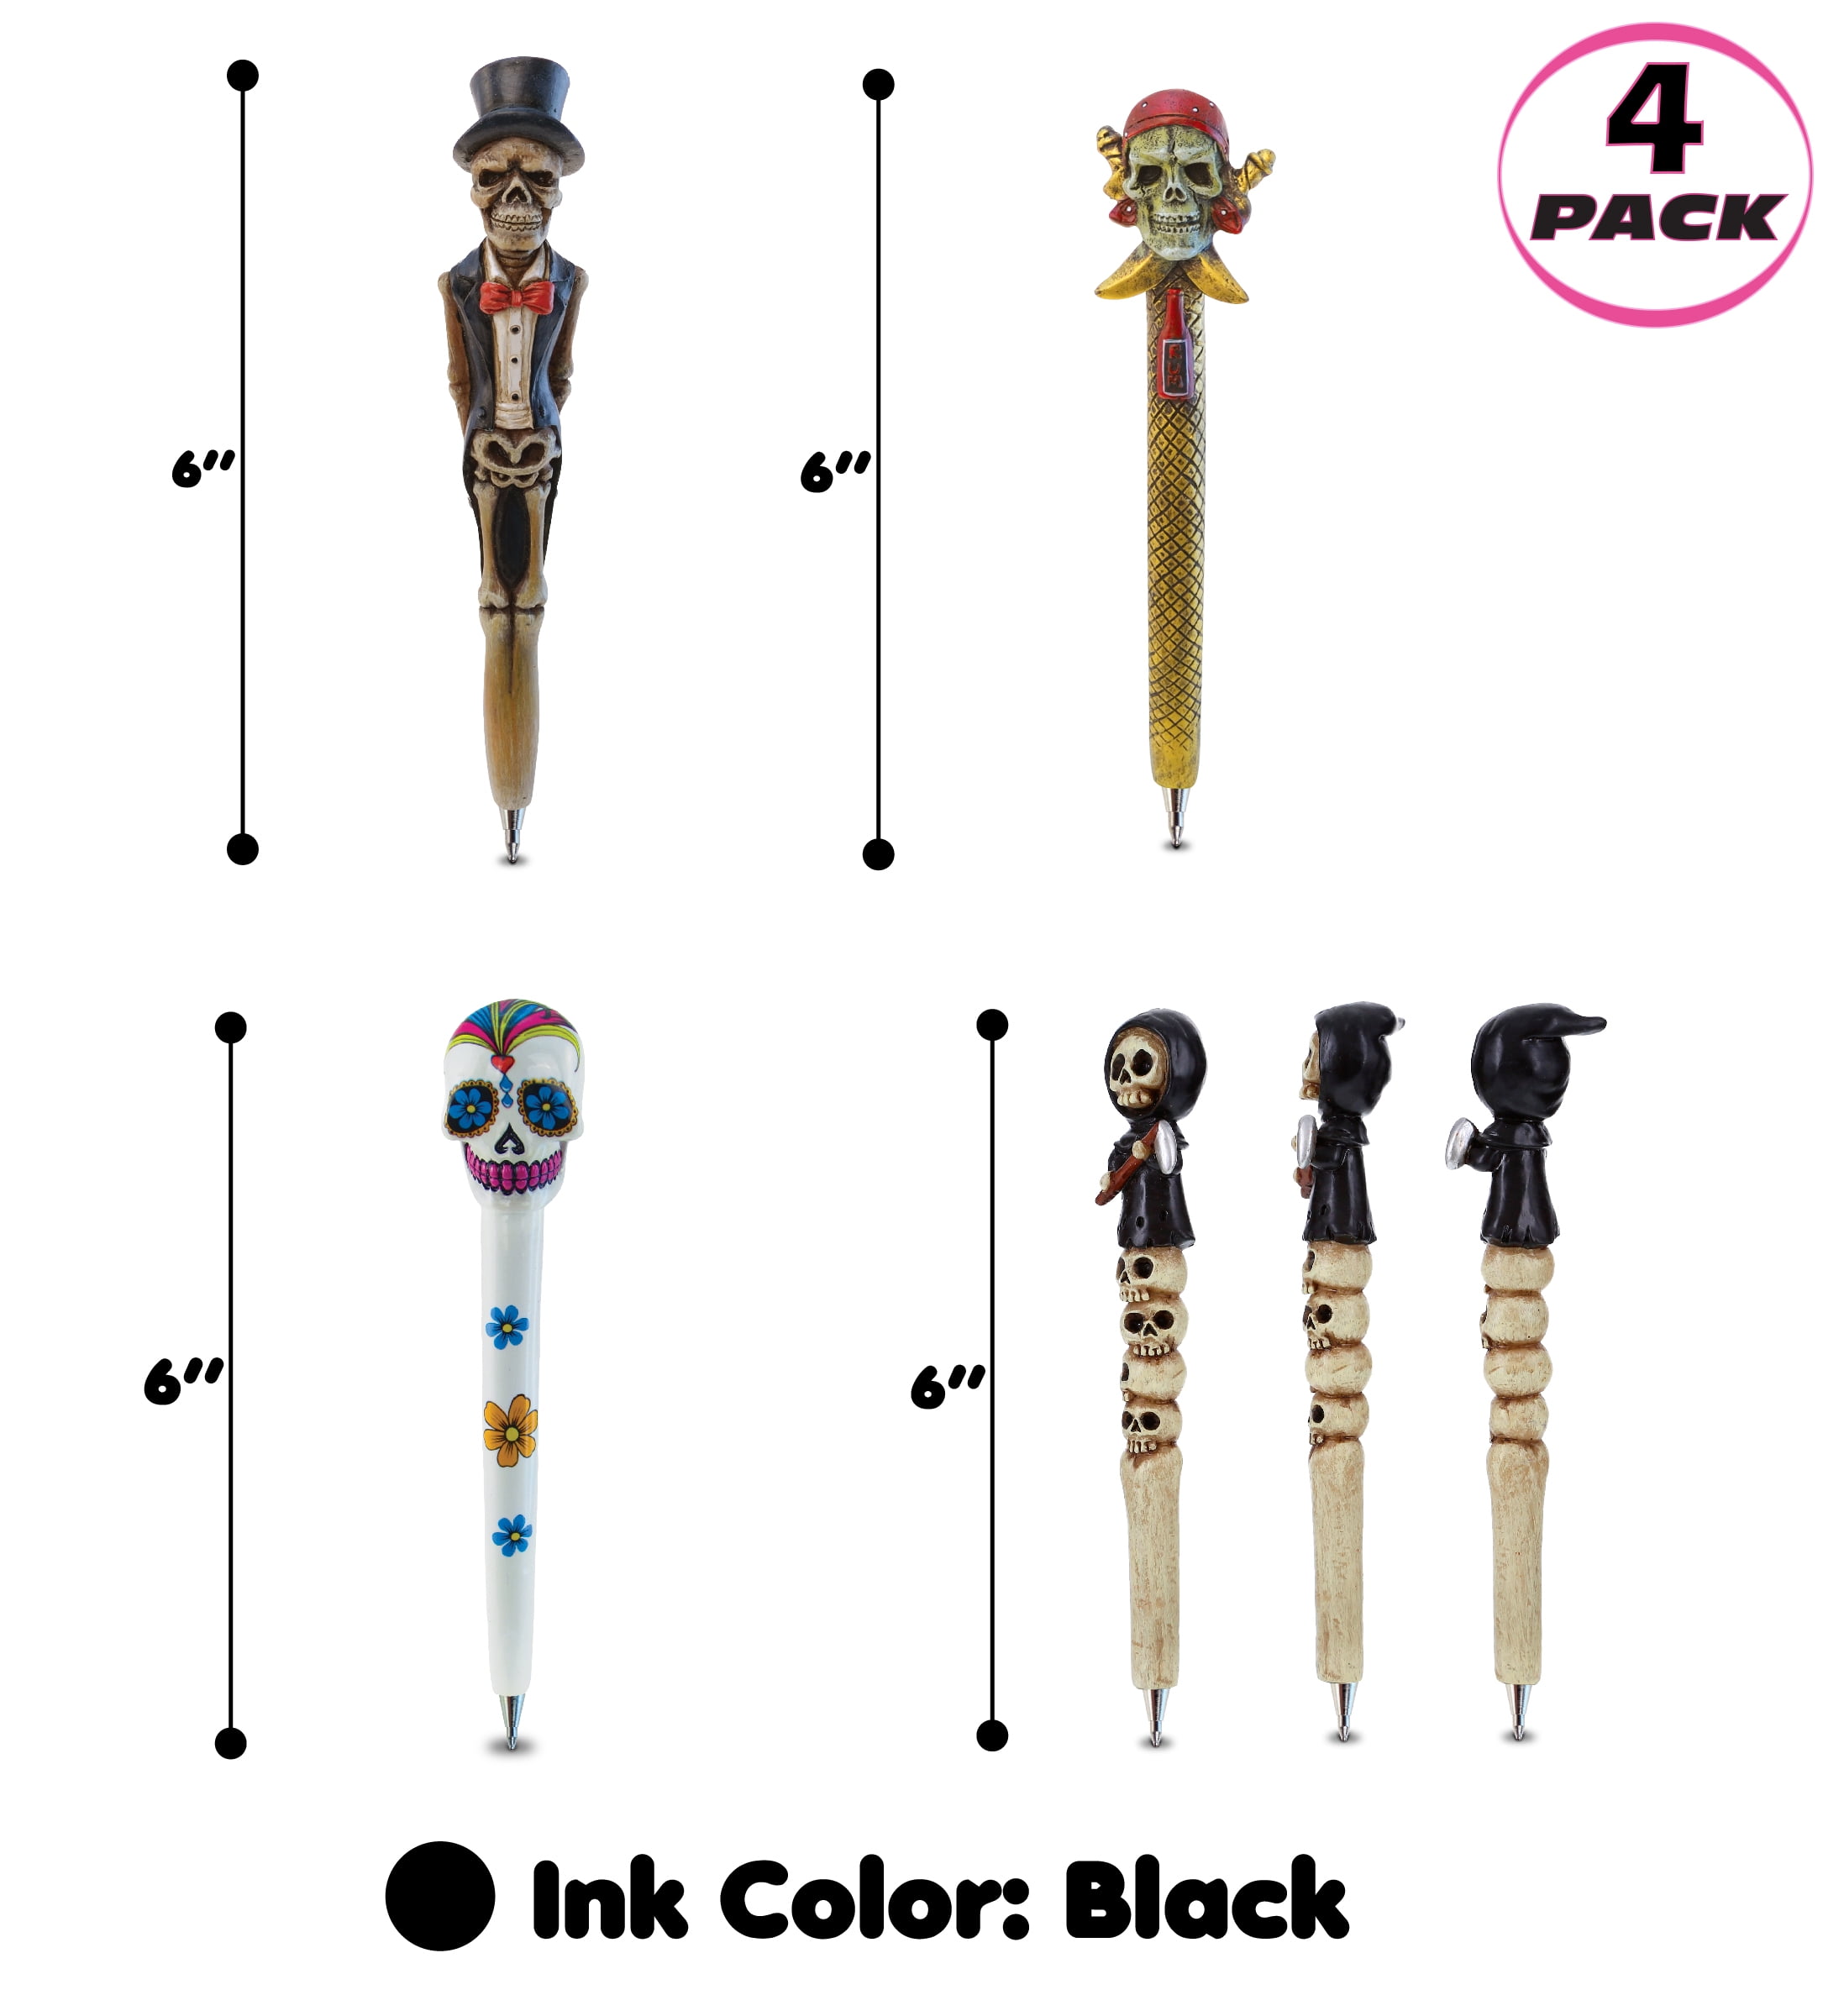  Planet Pens White Skull Novelty Pen - Fun & Unique Kids &  Adults Office Supplies Ballpoint Pen, Colorful Candy Skull Writing Pen  Instrument For School & Office : Office Products